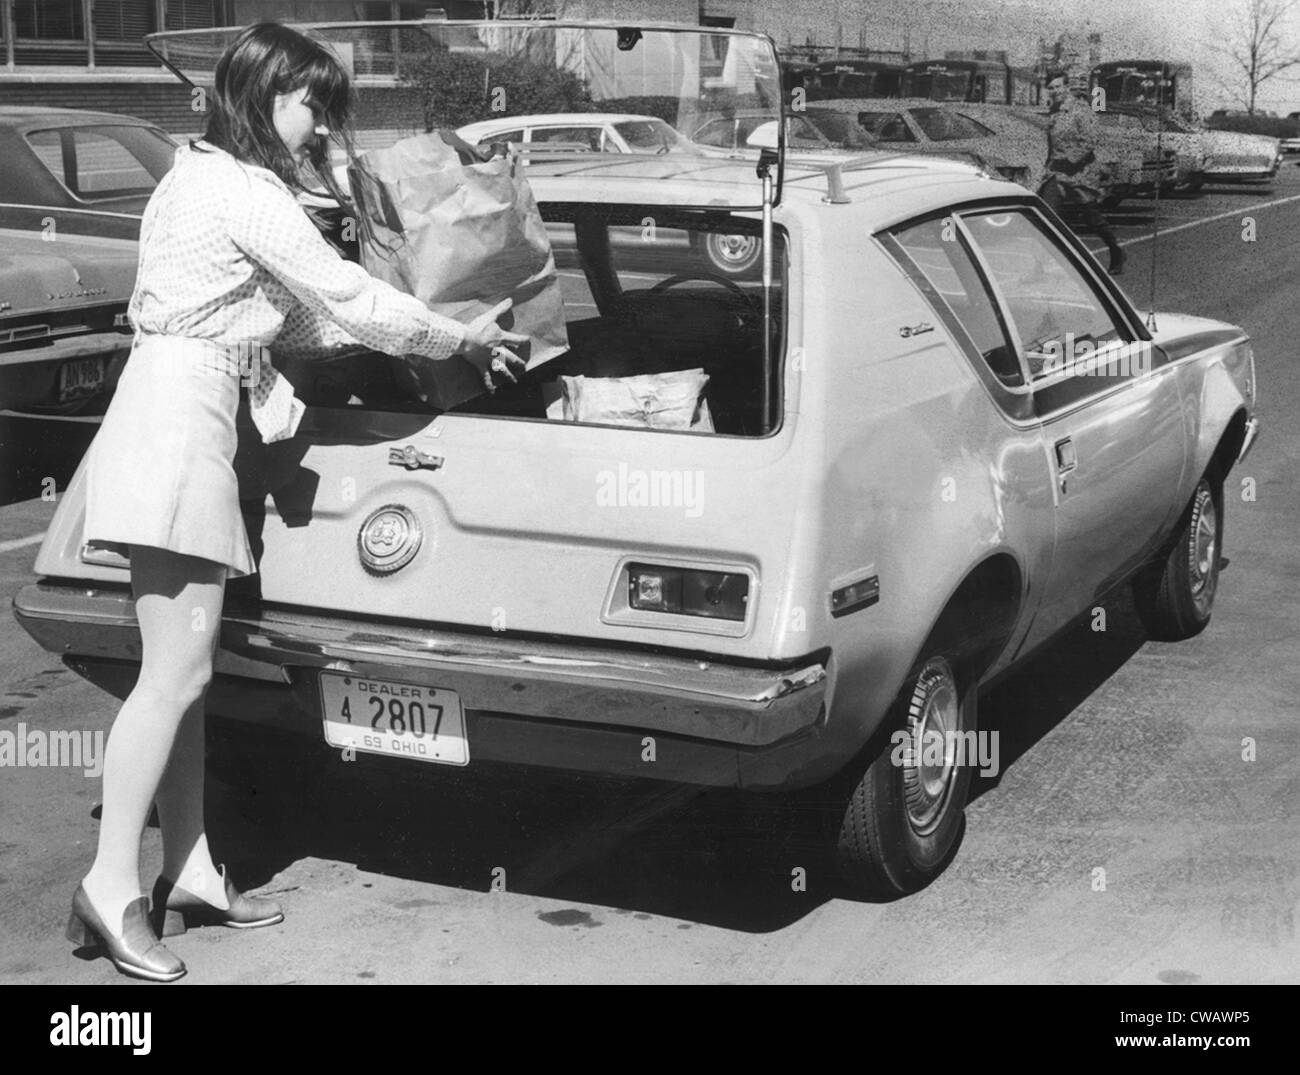 American Motors' The Gremlin, car owner placing grocery bags inside the rear lift-gate, April 9, 1970. Courtesy: CSU Stock Photo